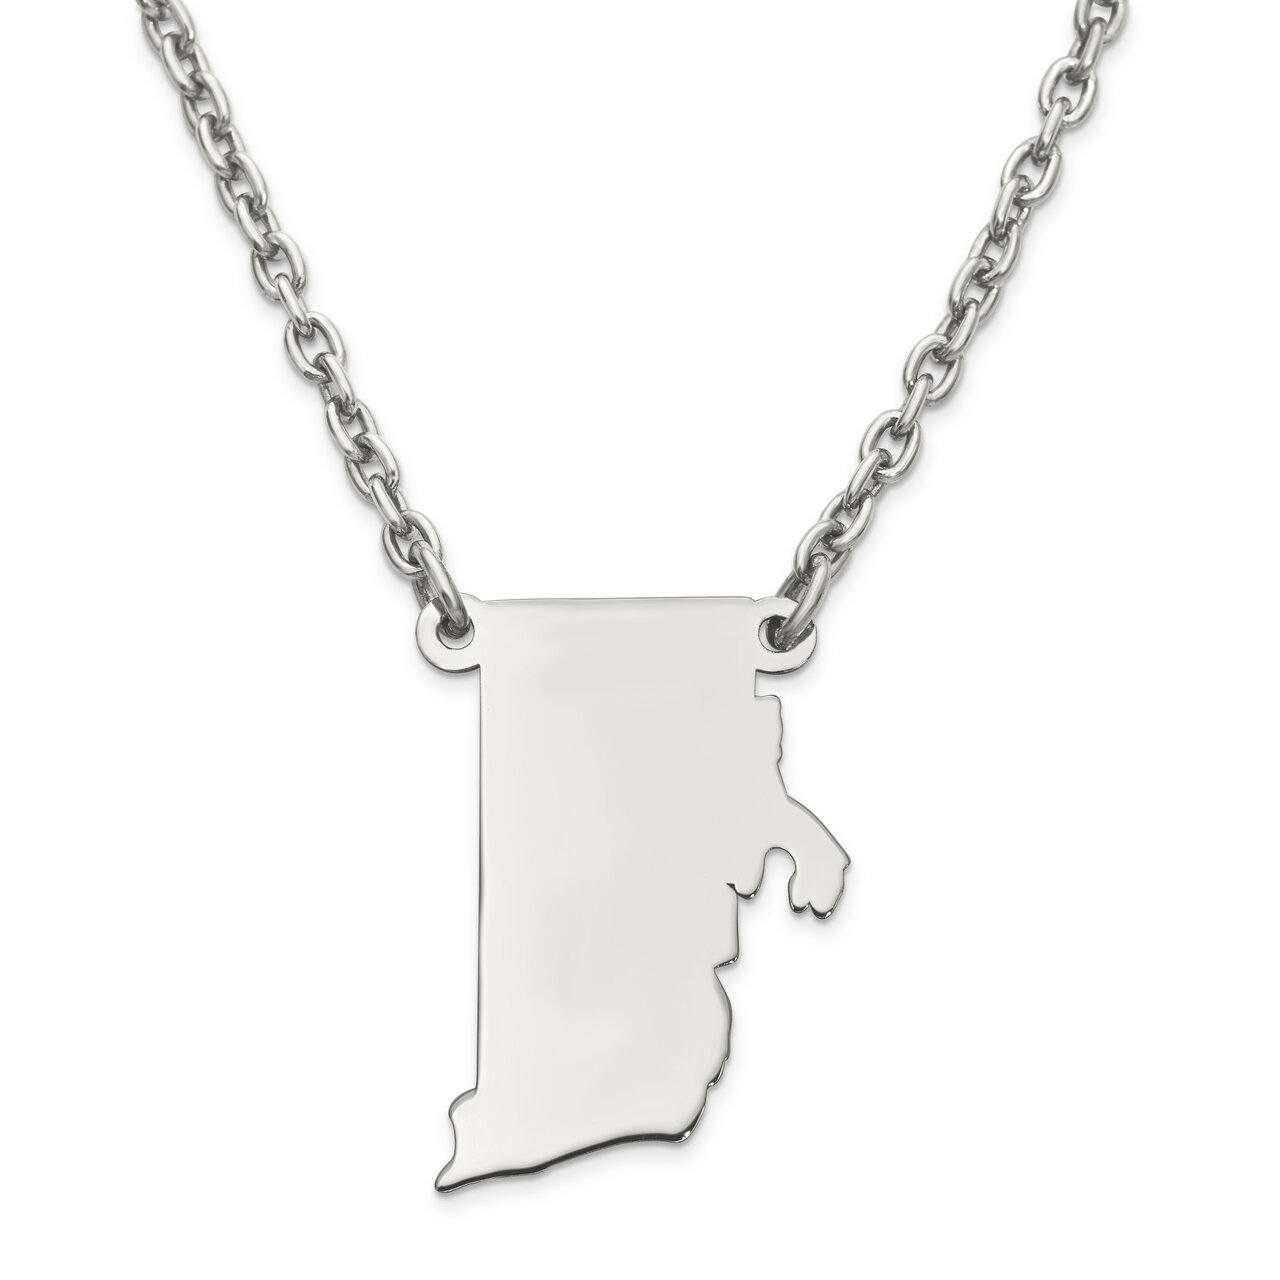 Rhode Island State Pendant Necklace with Chain 14k White Gold Engravable XNA706W-RI